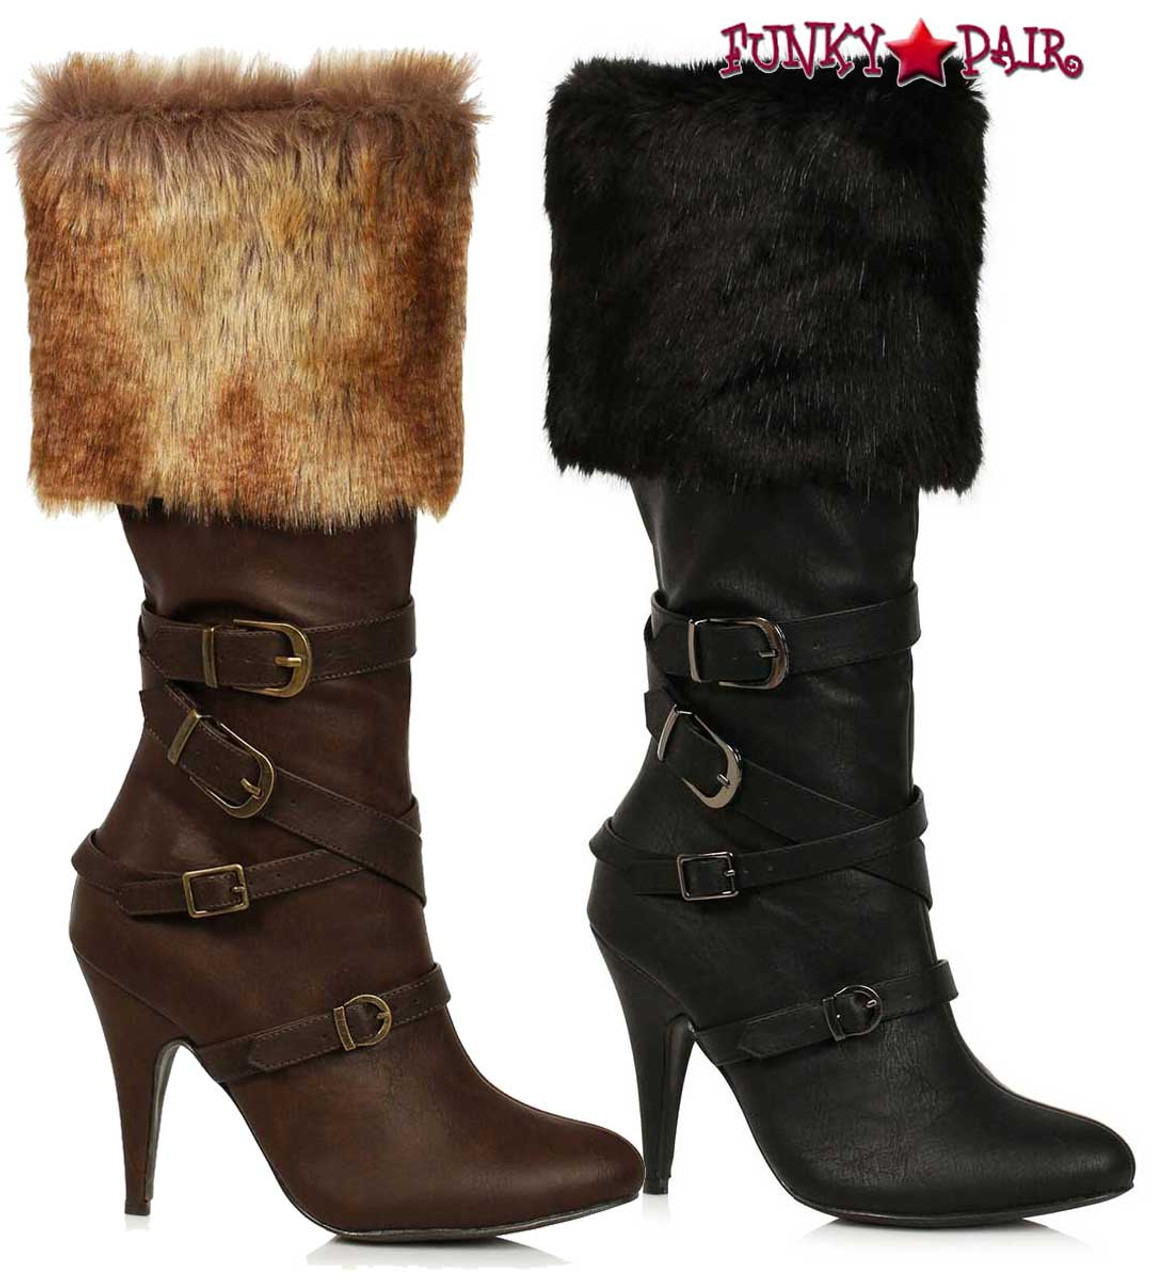 418-GRETA, 4 Inch Boots with Faux Fur Cuff By Ellie Shoes